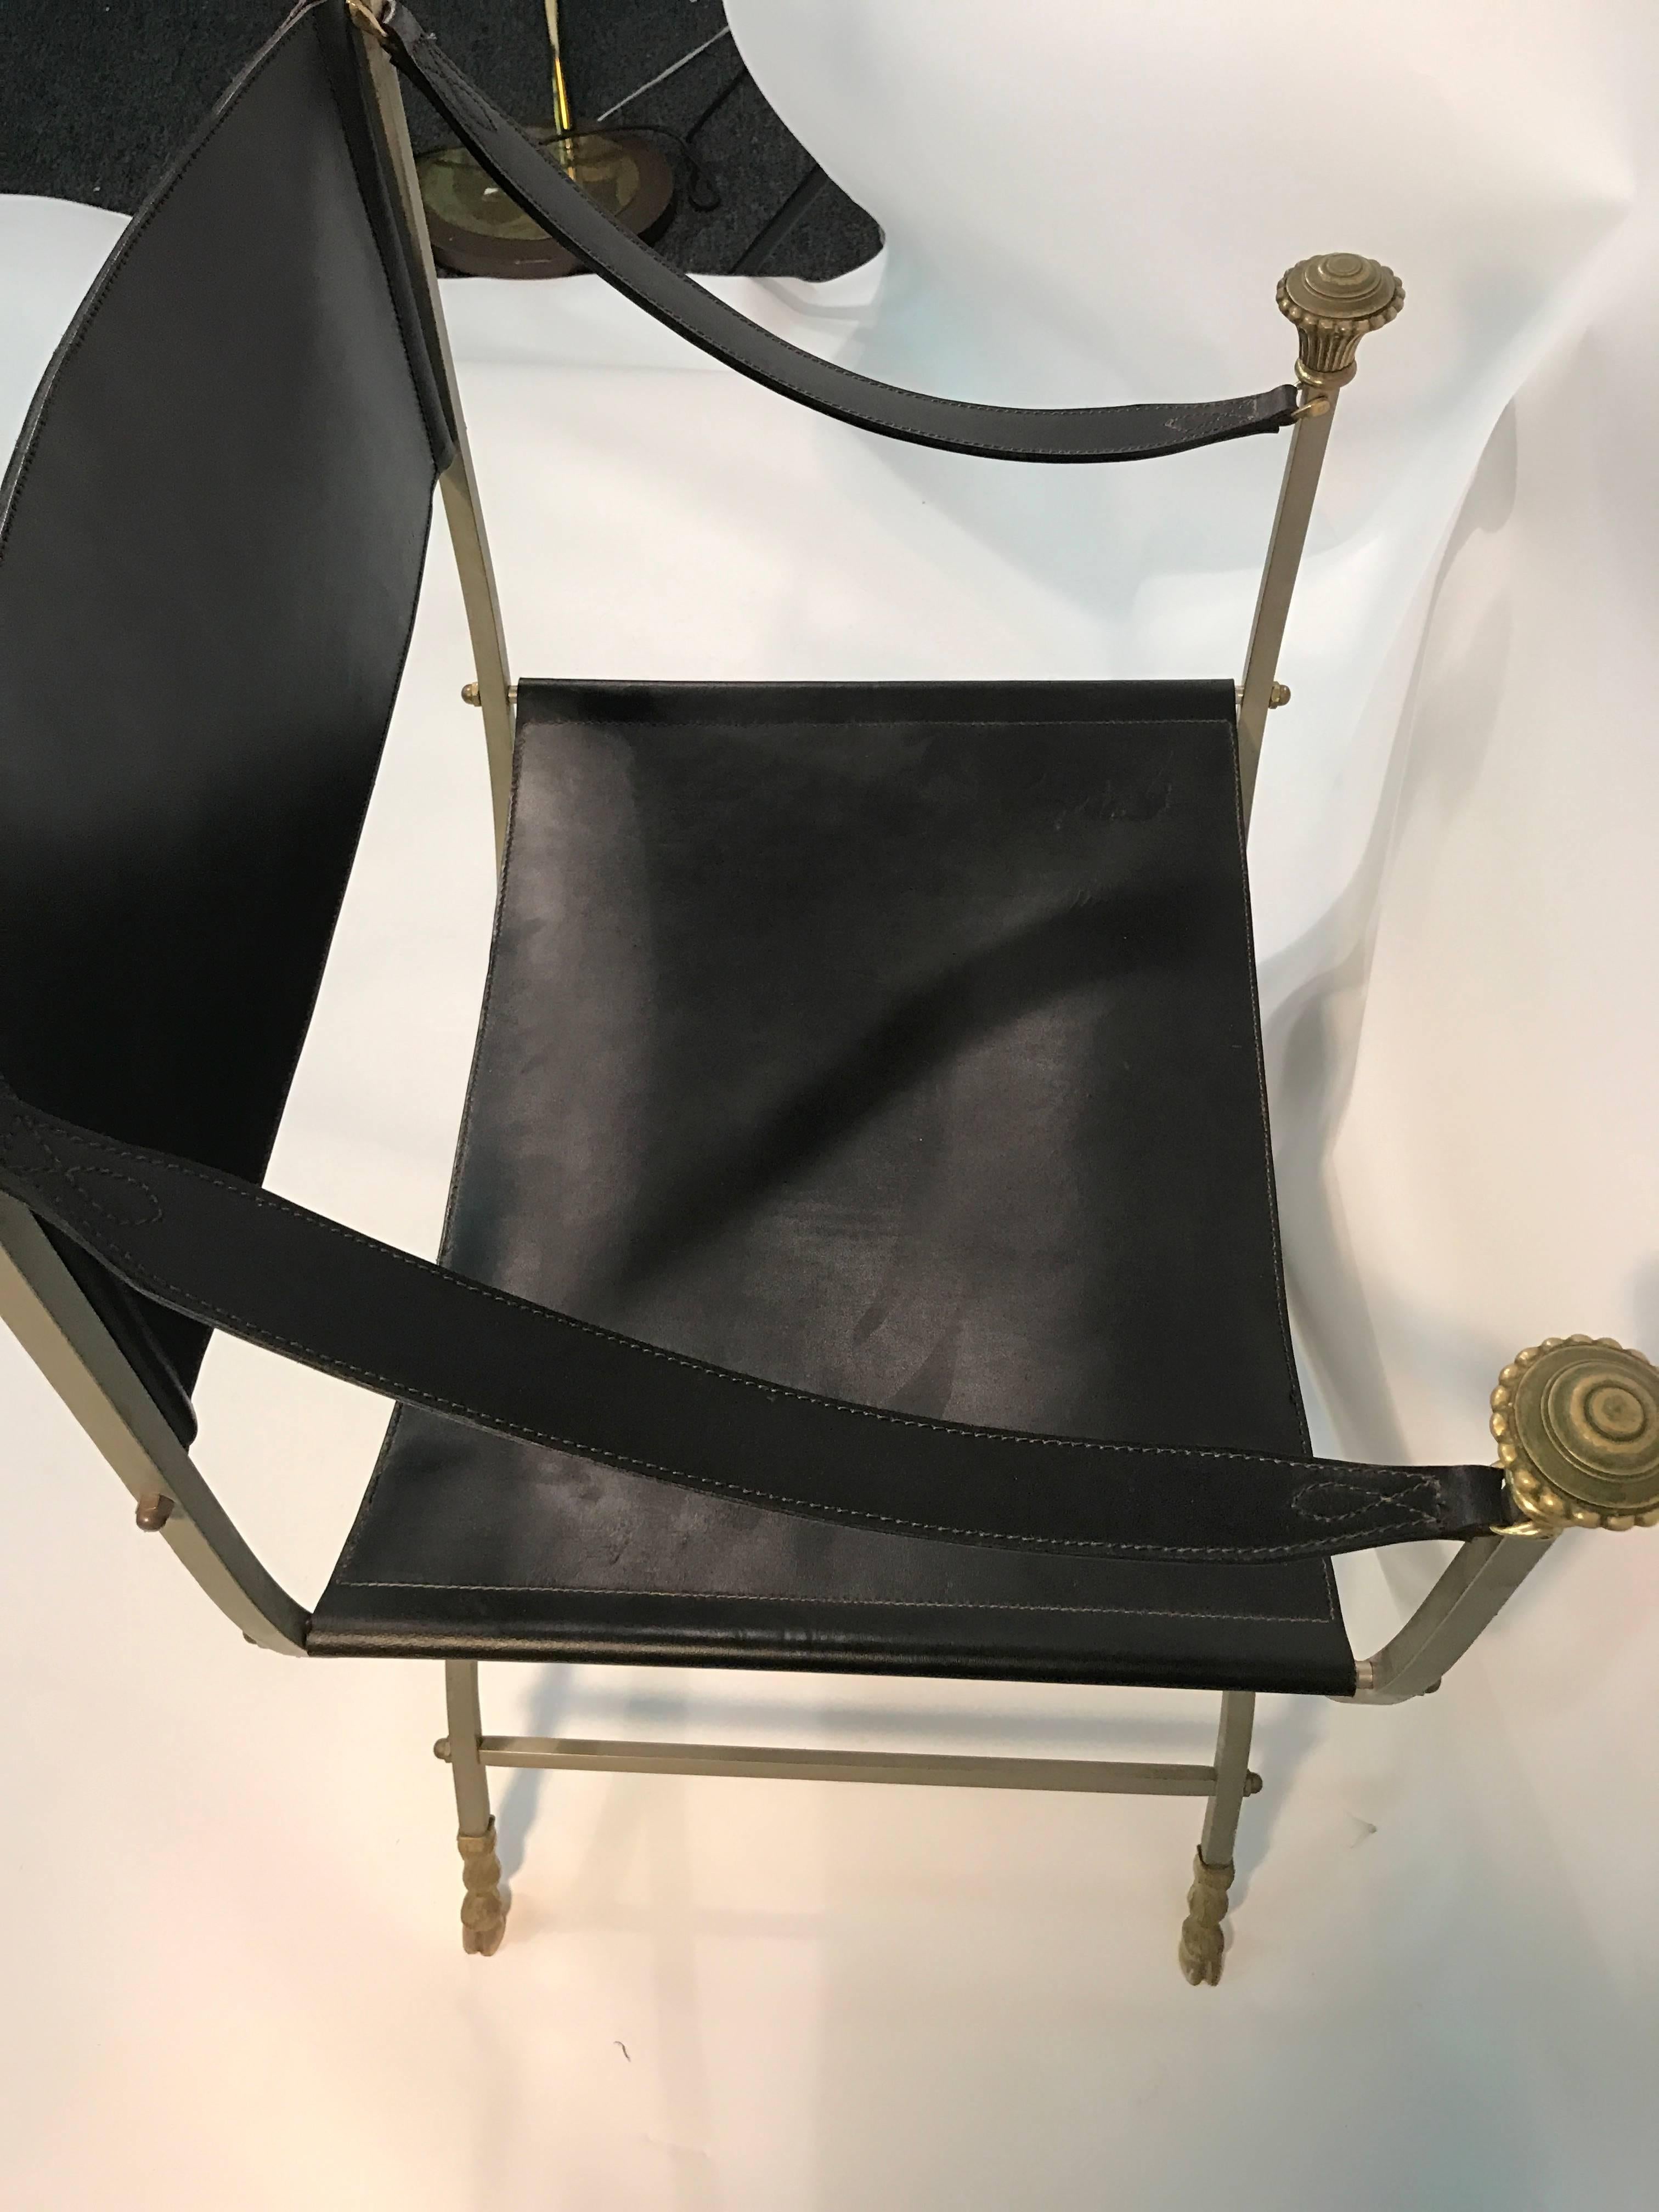 Striking Steel and Brass Black Leather Chair with Ram's Head Design by Jansen In Good Condition For Sale In Mount Penn, PA